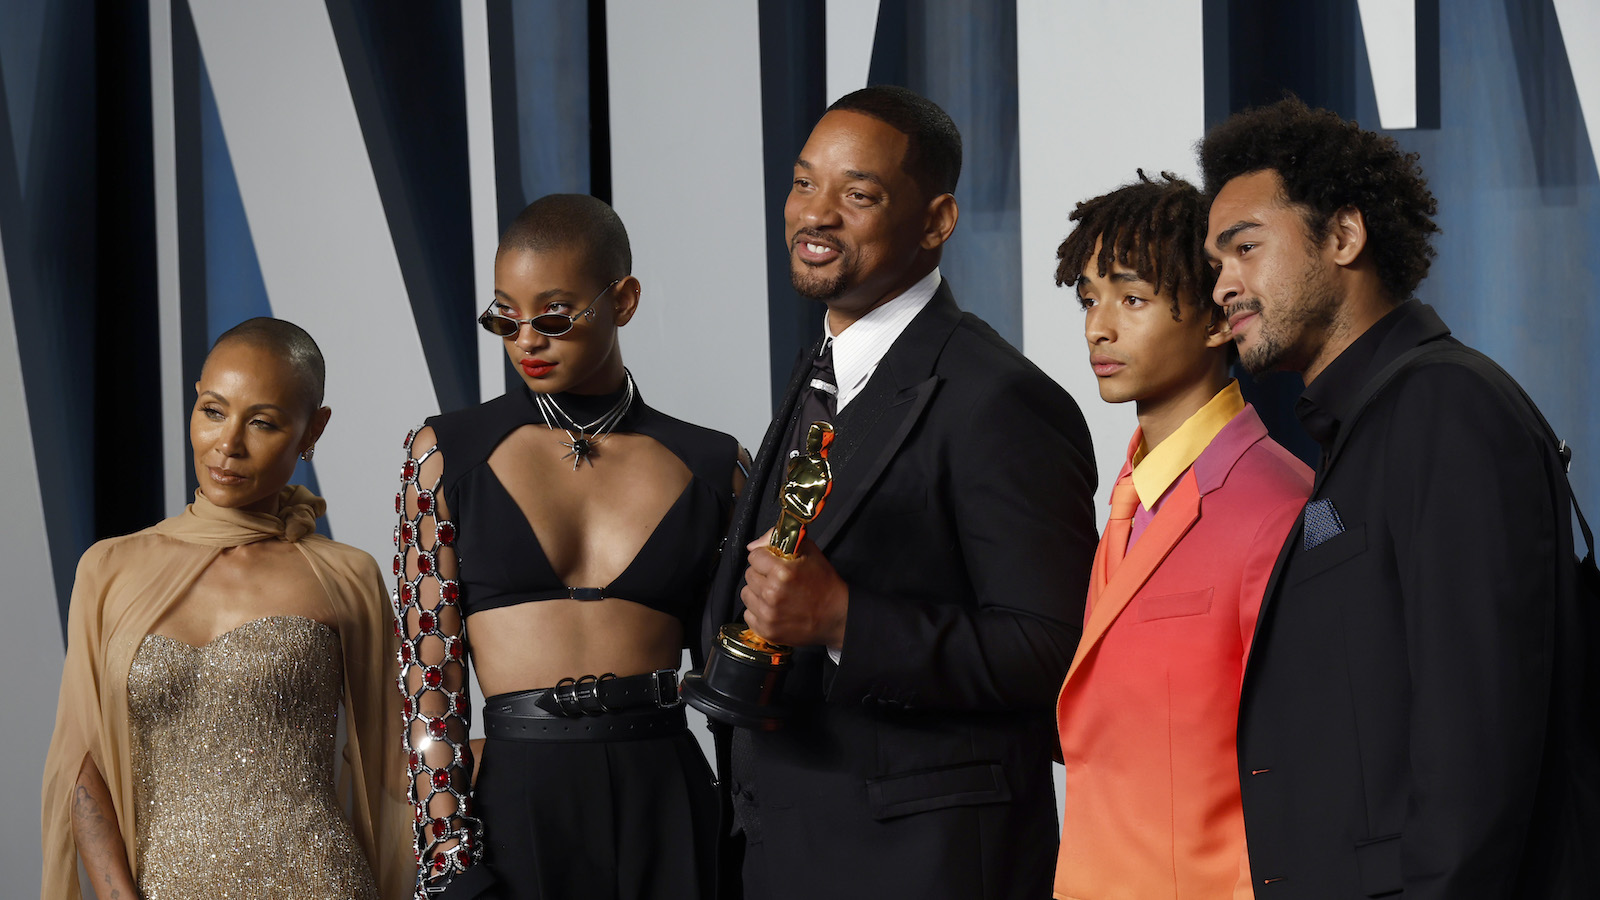 Will Smith holds Academy Award statue accompanied by wife Jada Pinkett and children Willow, Jaden, and Trey on the red carpet of the Vanity Fair Oscar party.